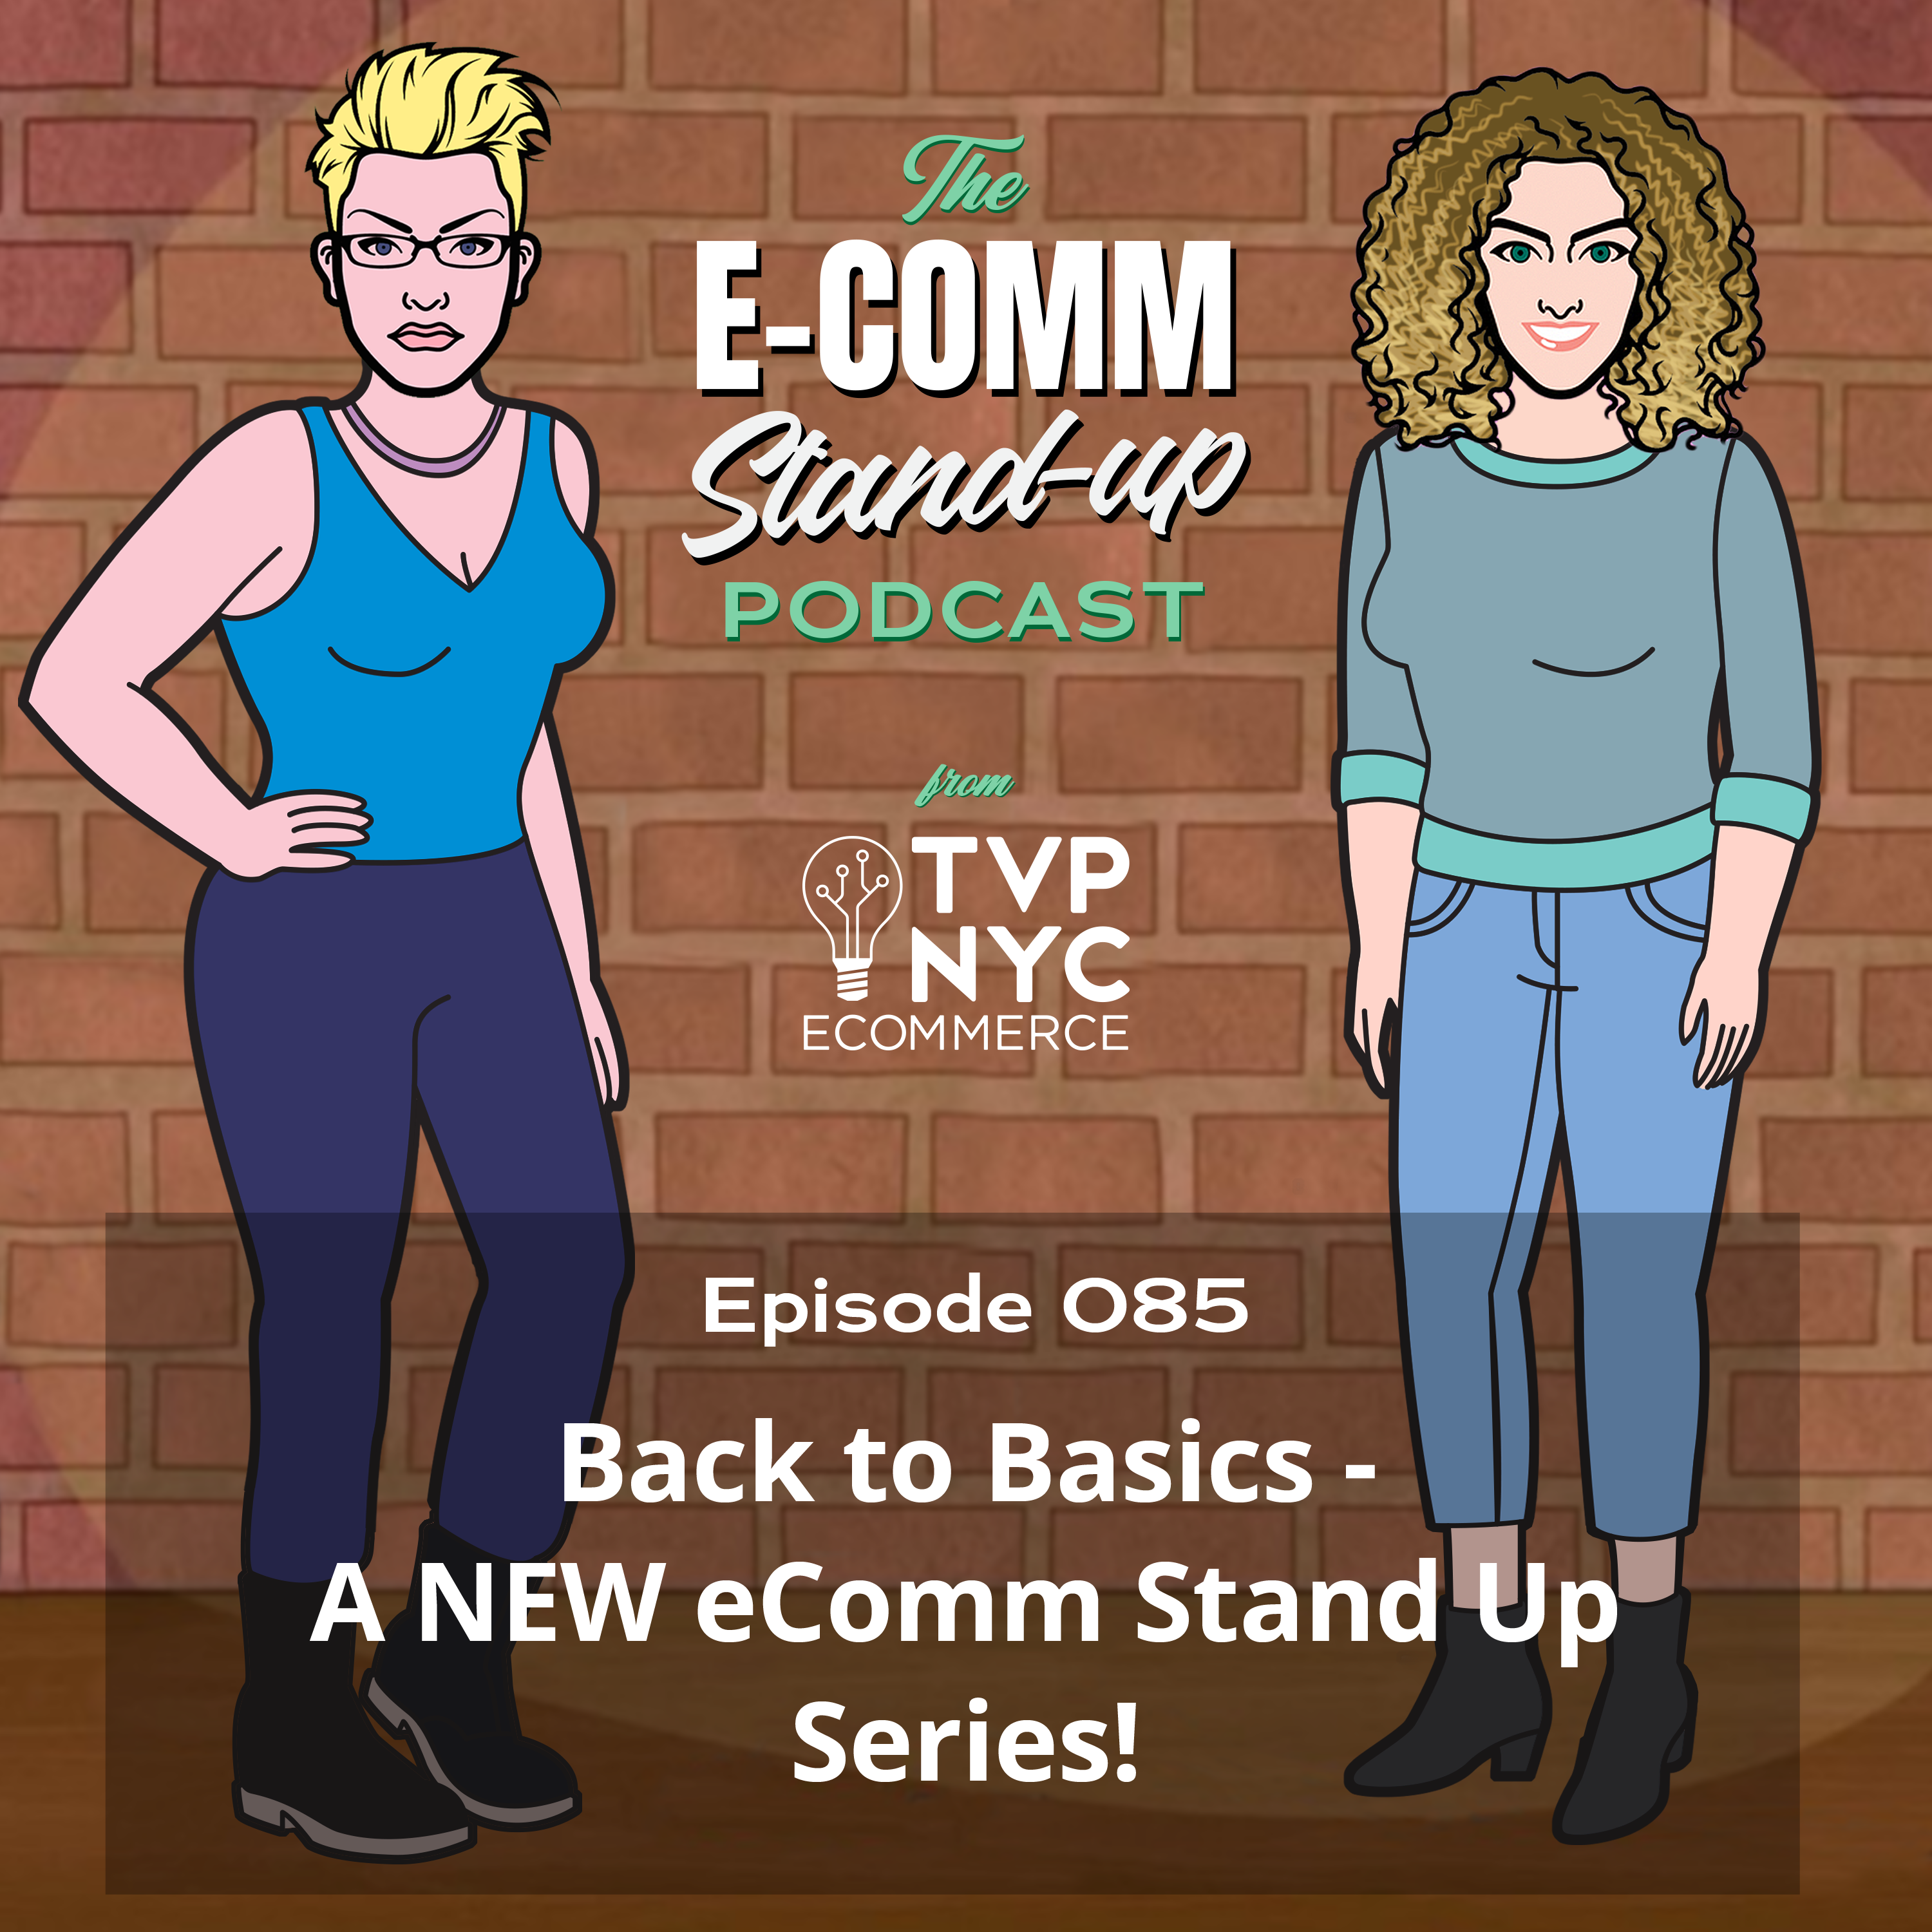 Back to Basics - A NEW eComm Stand Up Series!